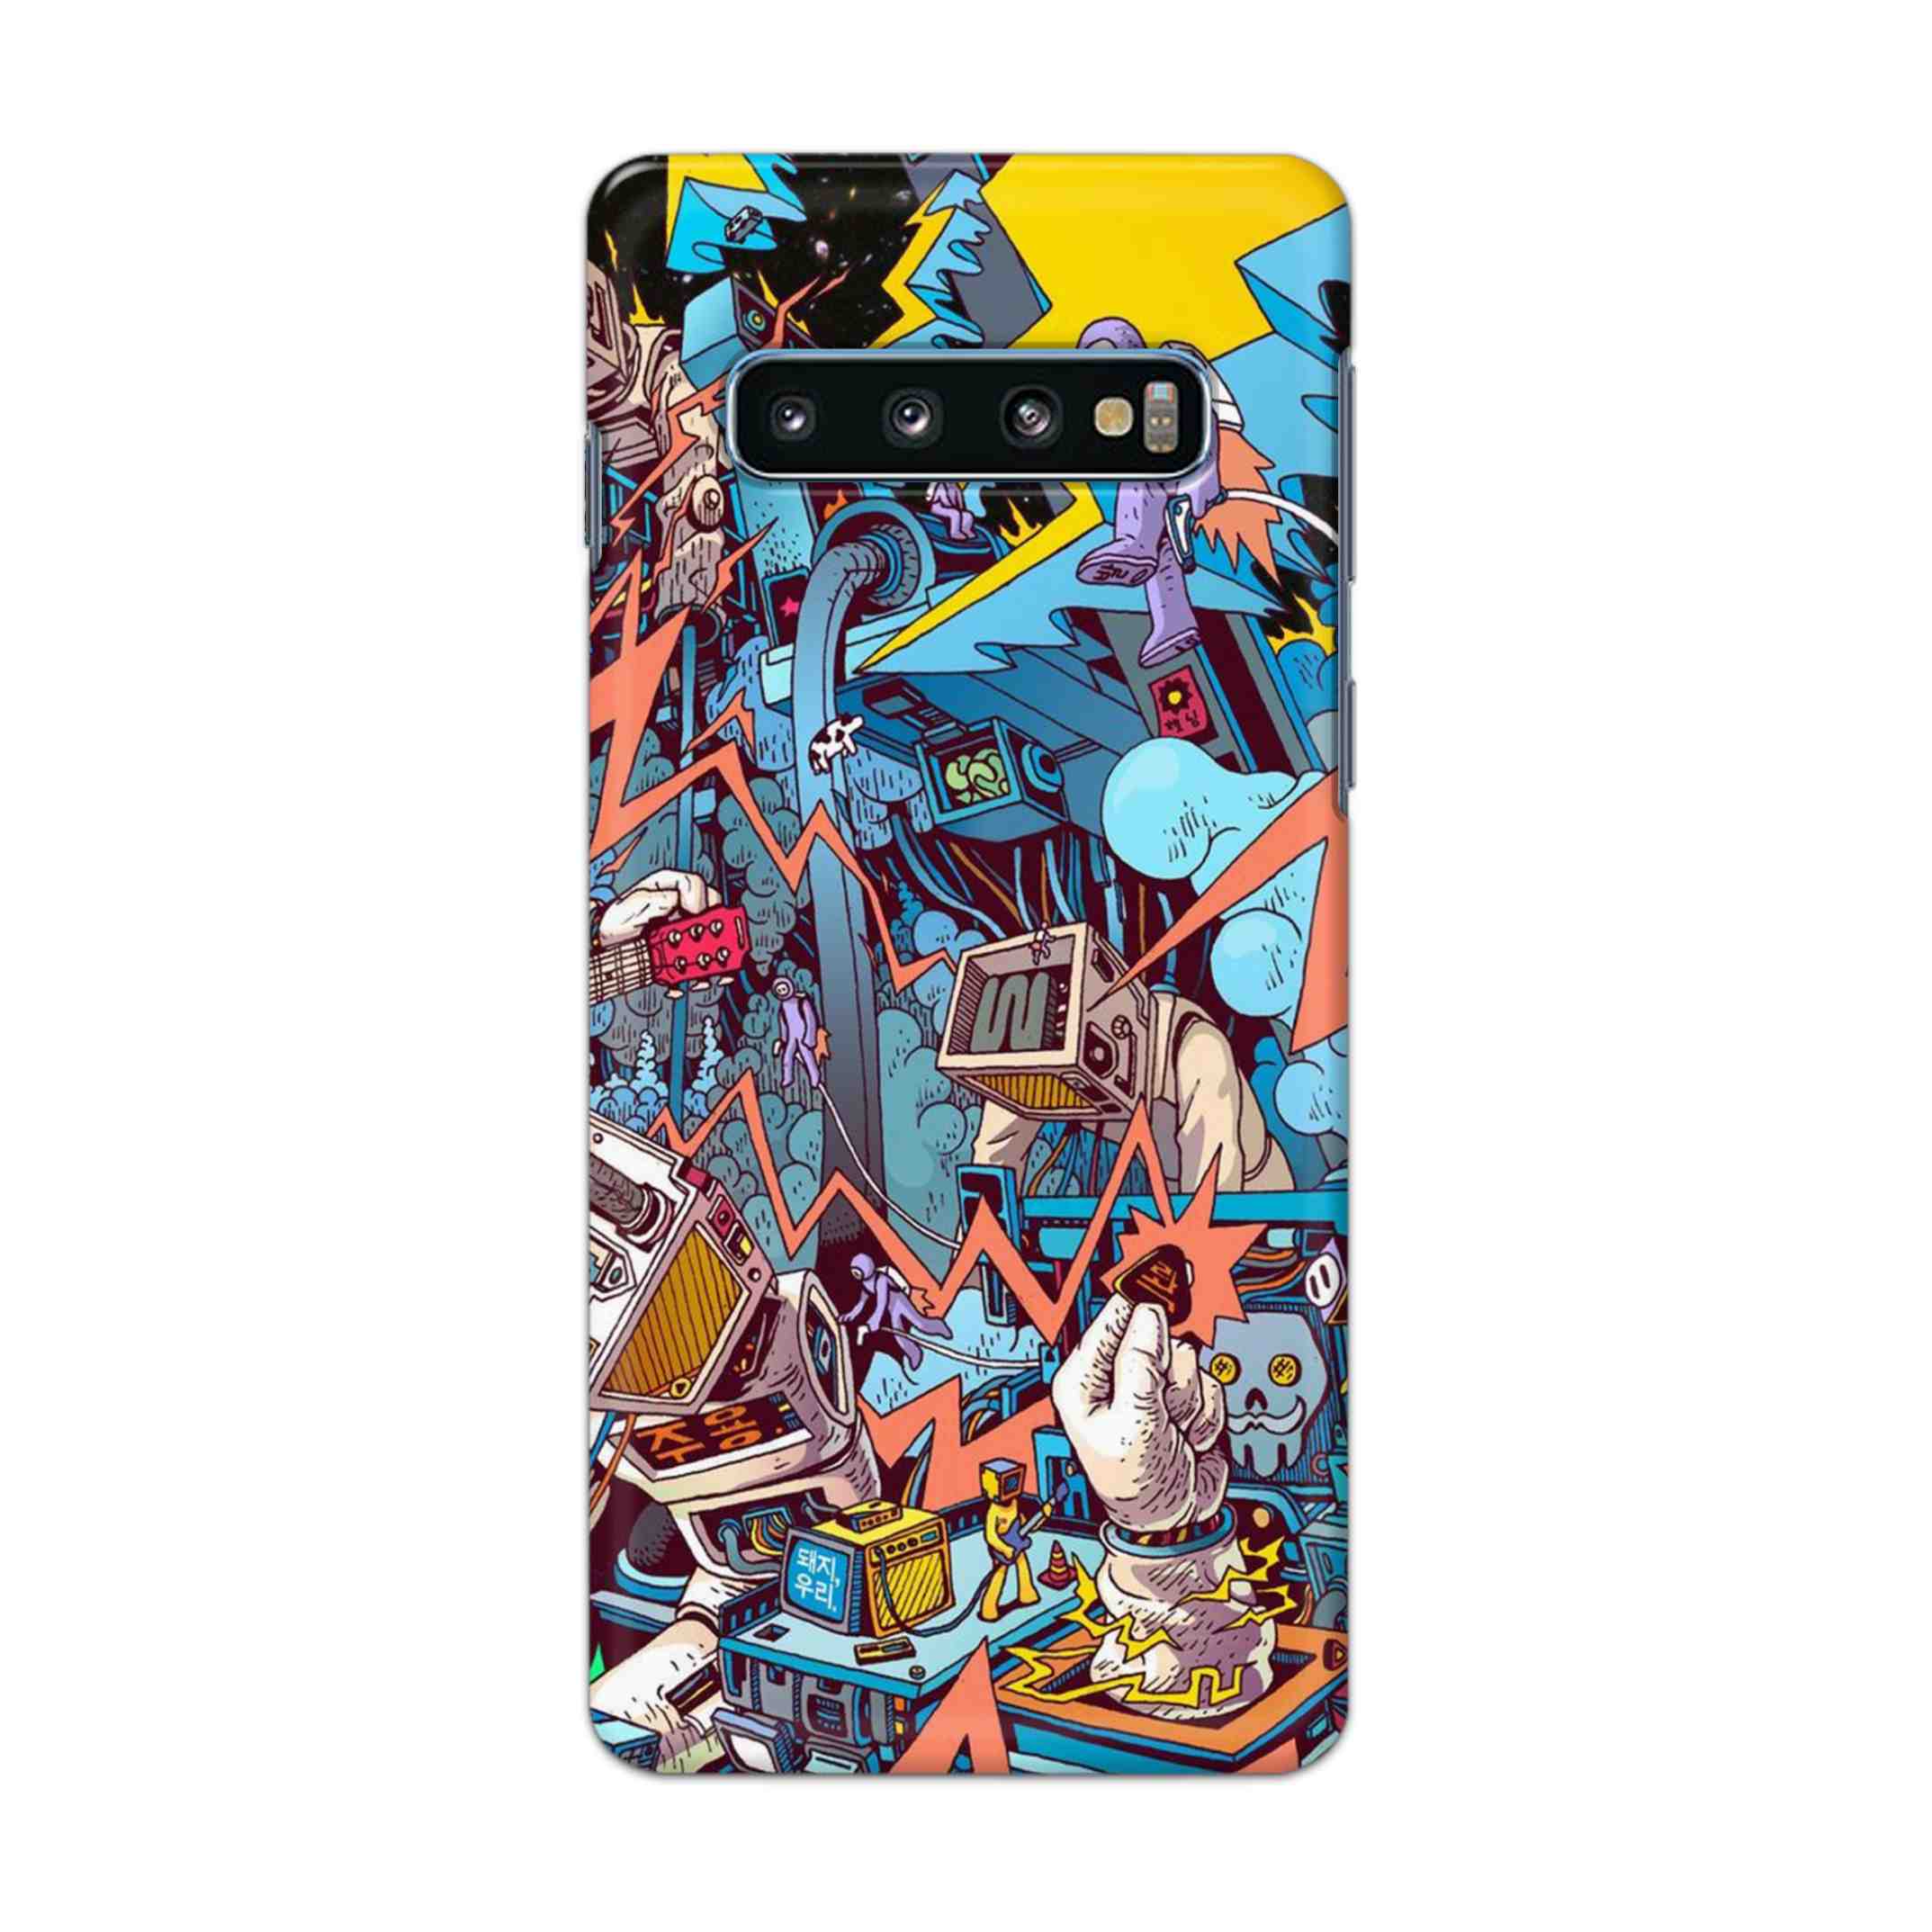 Buy Ofo Panic Hard Back Mobile Phone Case Cover For Samsung Galaxy S10 Online